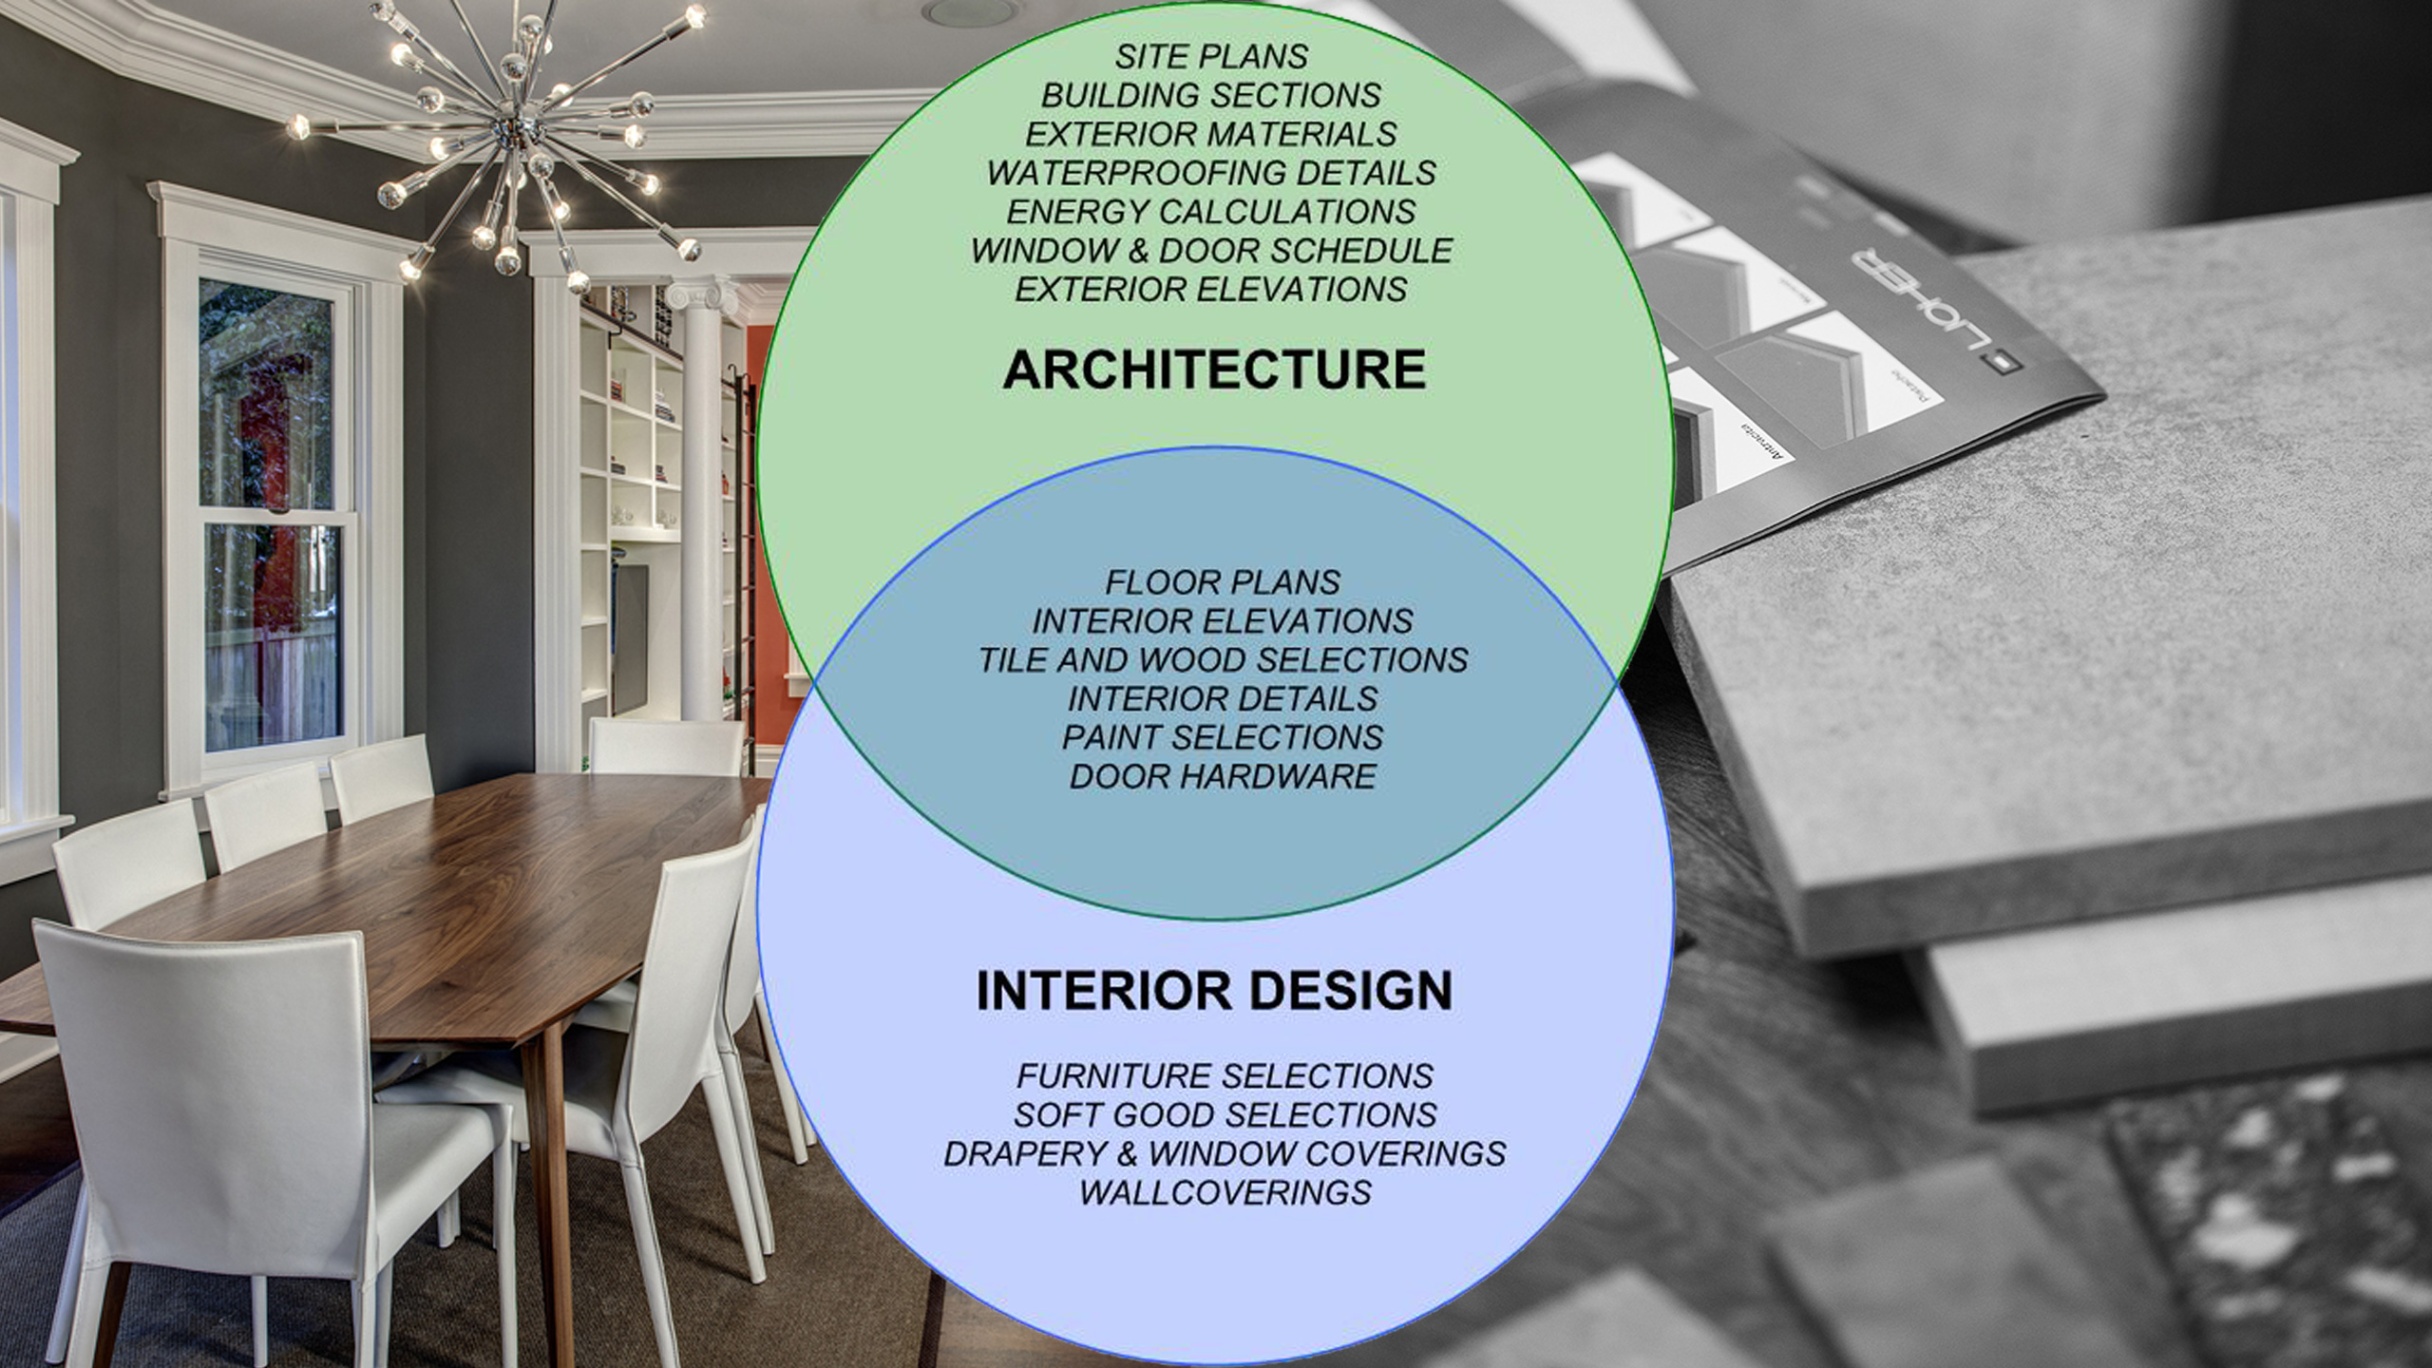 Architectural Designer Or Architect: What’s The Difference?